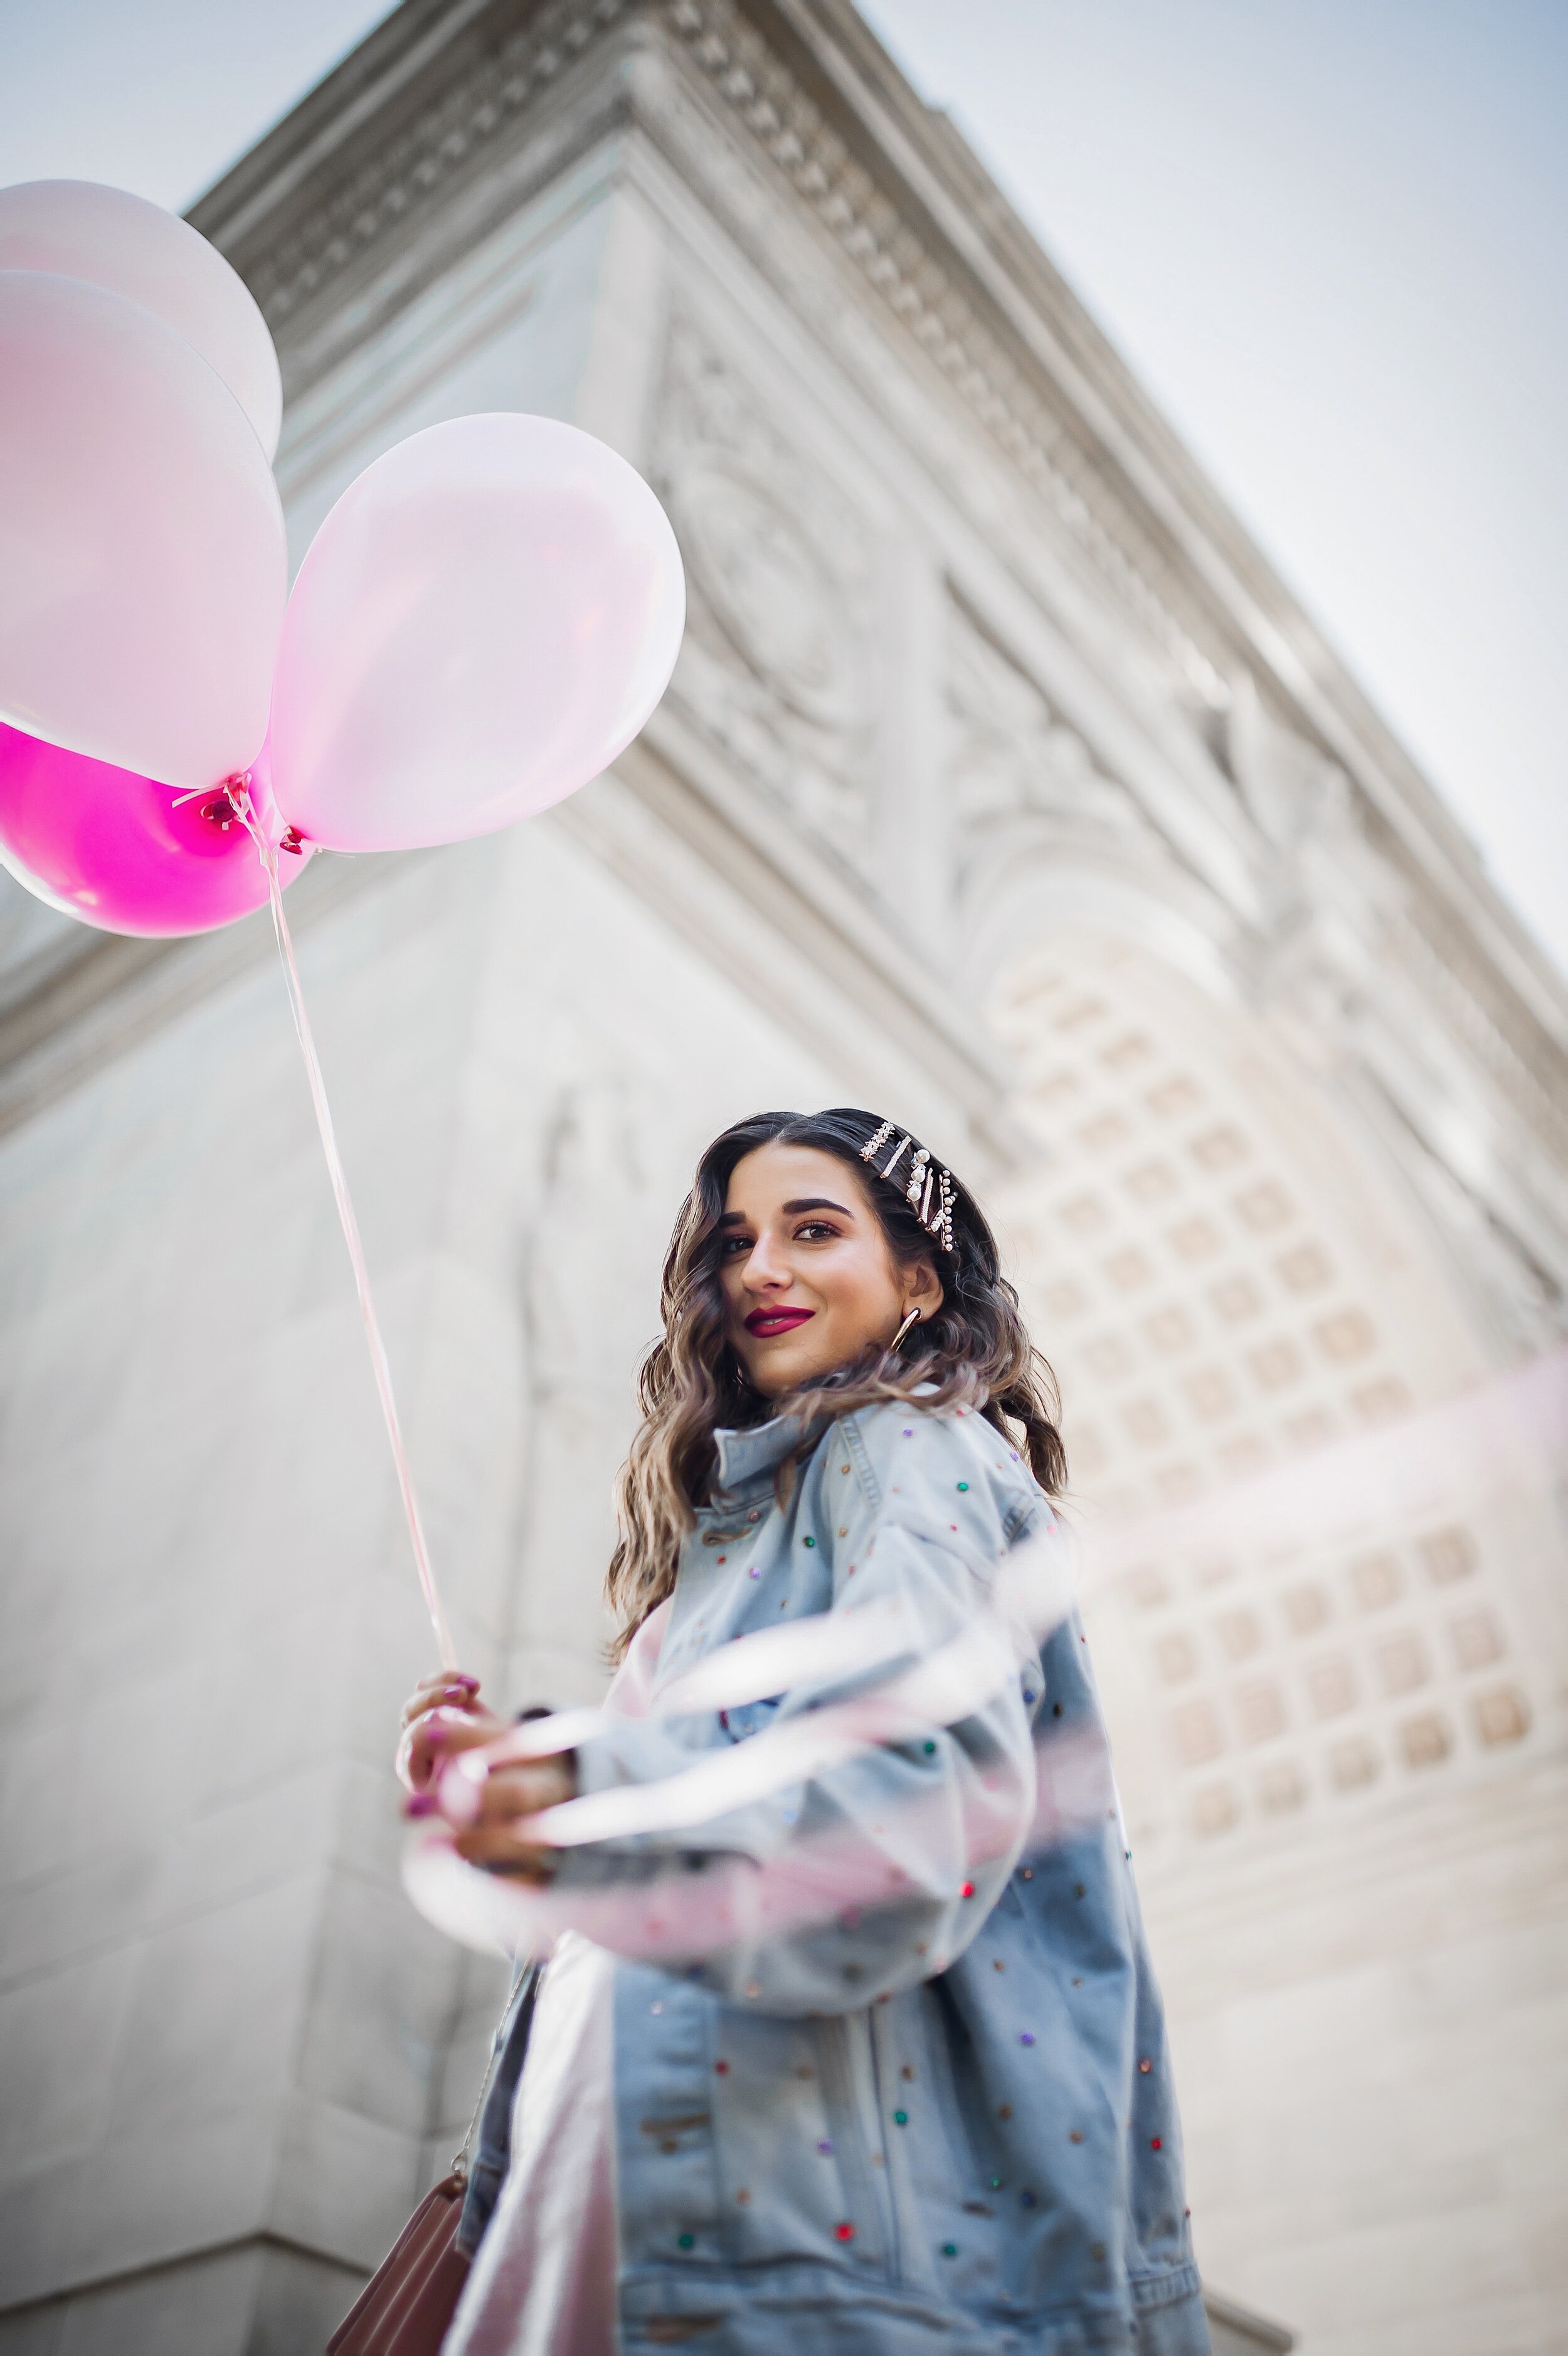 The Final Year Of My 20's Happy 29th Birthday Esther Santer NYC Street Style Blogger White Booties Trend Jeweled Jean Jacket Levis Denim Pink Balooons Leather Skirt Hair Clips Accessories Pastel Blue Shoes New Yoek City  Inspo Shoot Washington Square.JPG